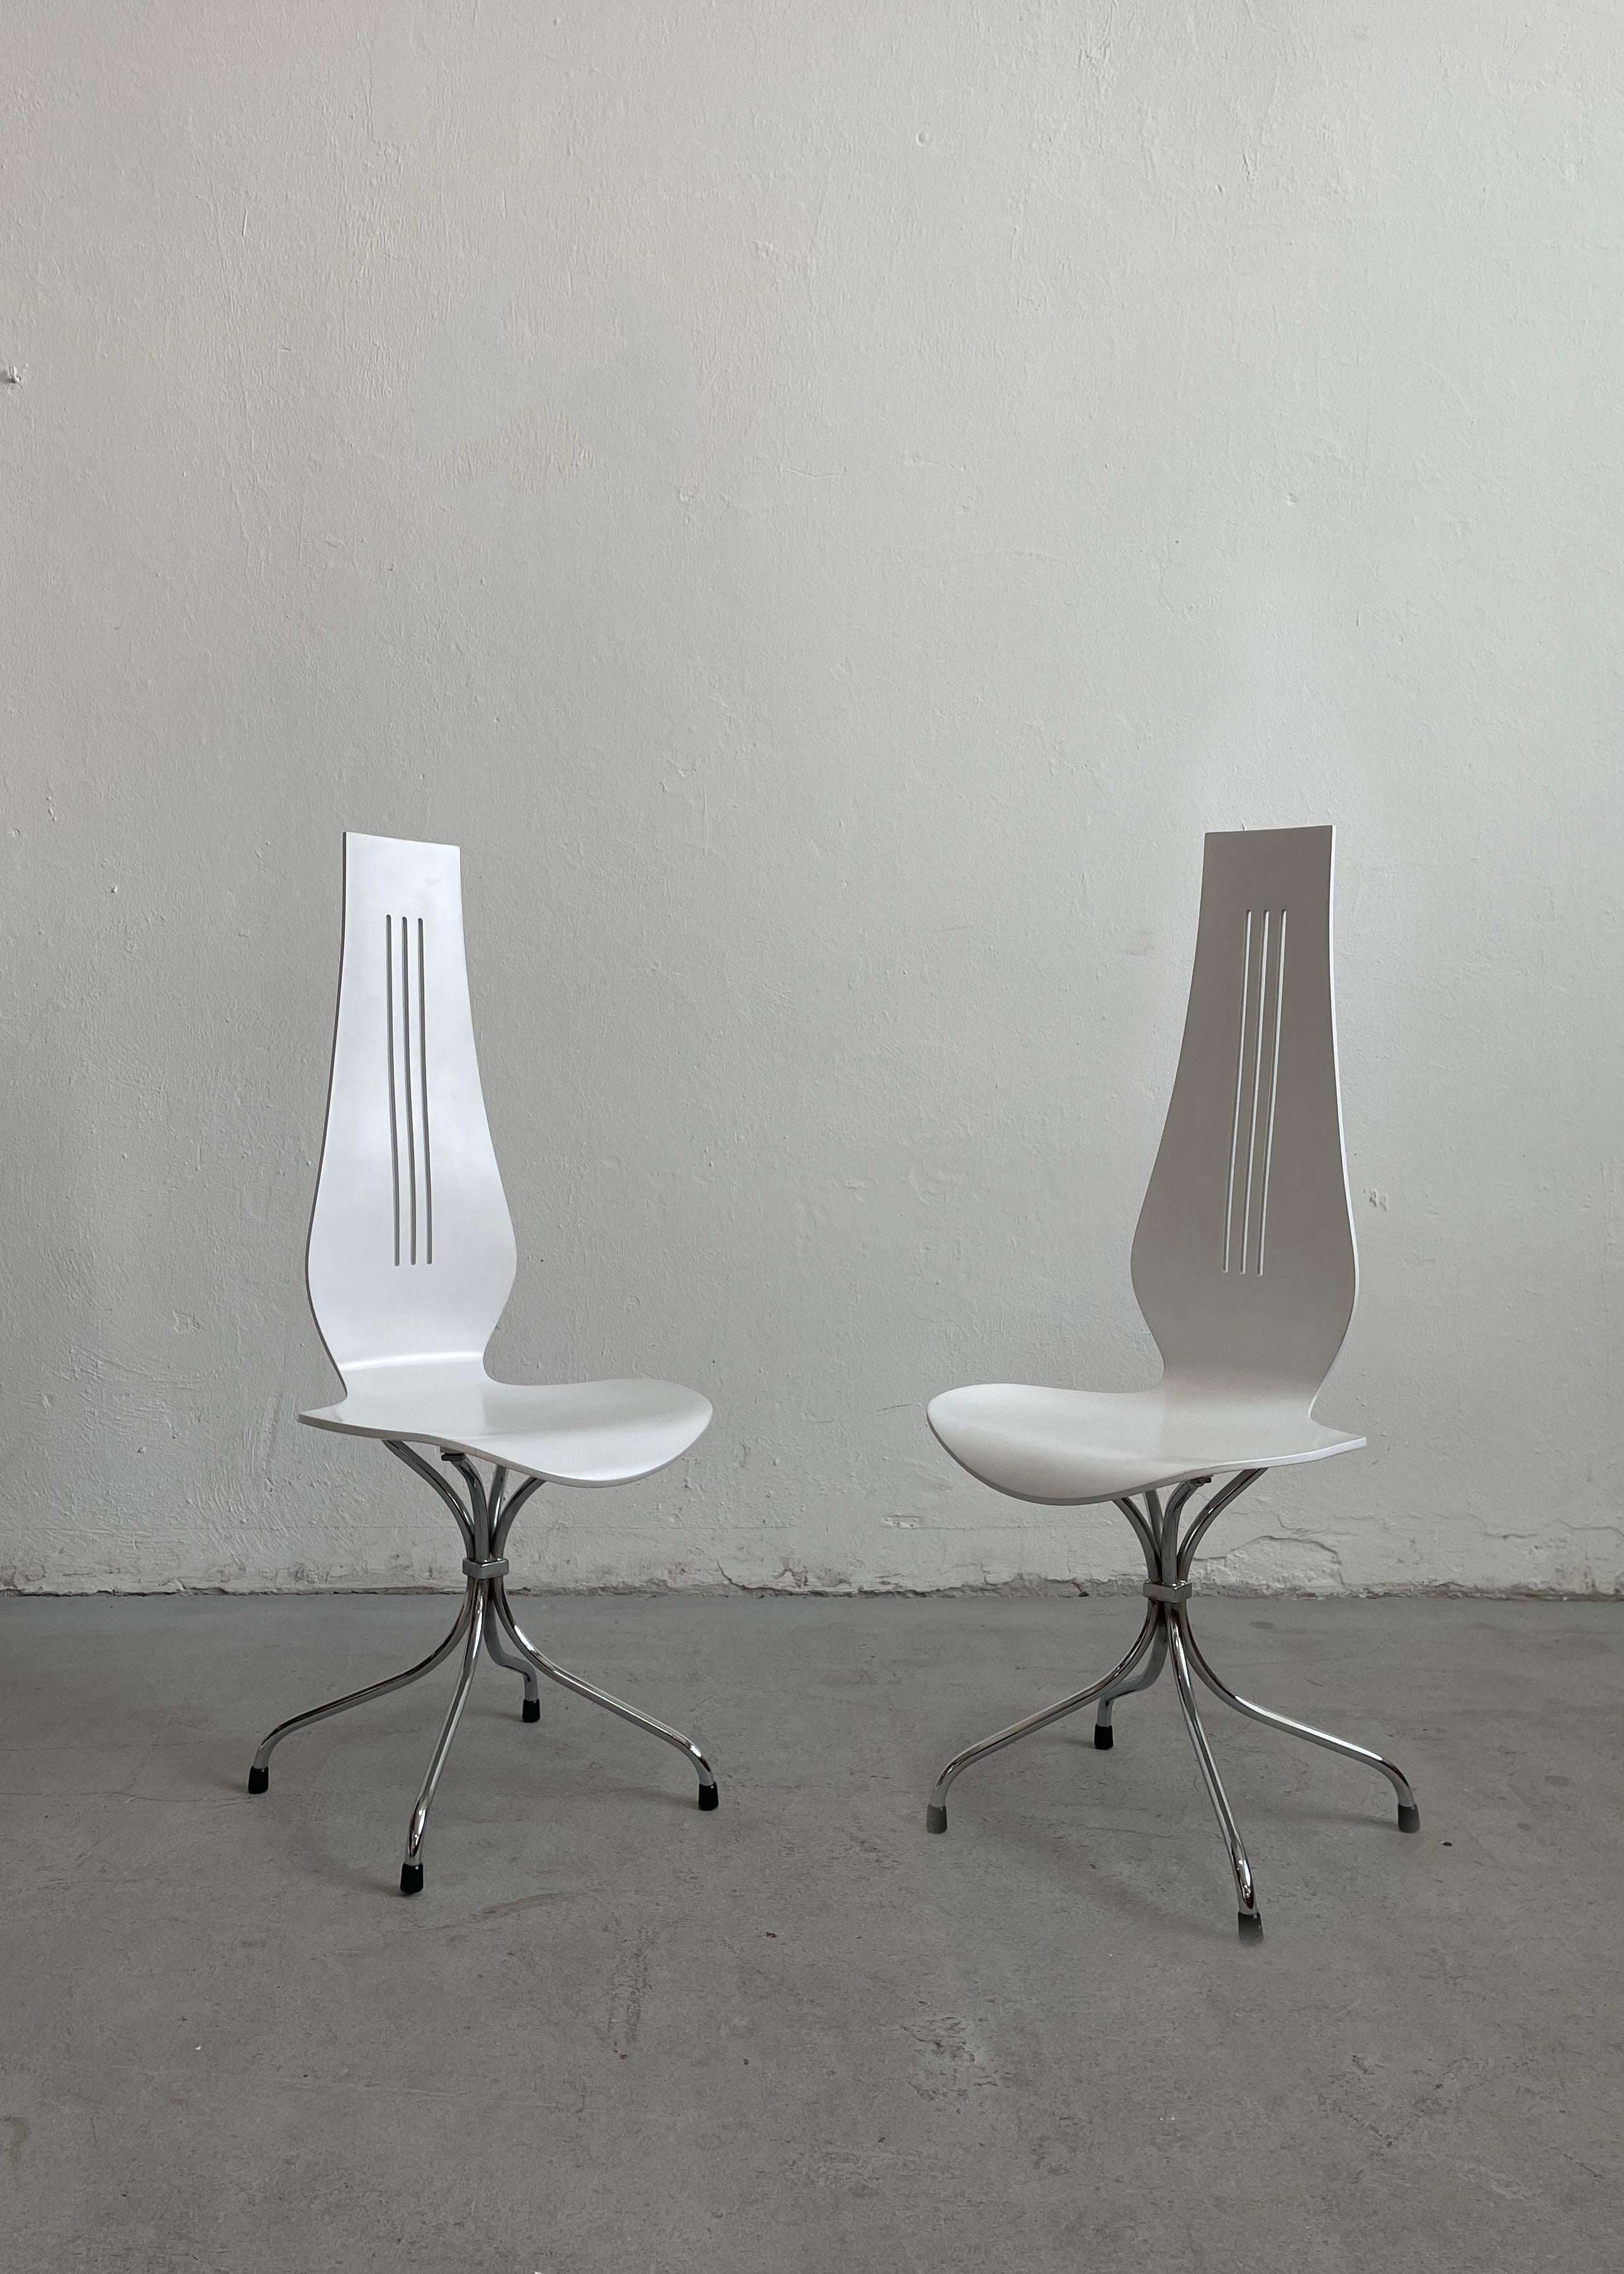 Mid-20th Century Set of 6 Mid-Century Modern White Dining Chairs by Theo Häberli 1960 Switzerland For Sale